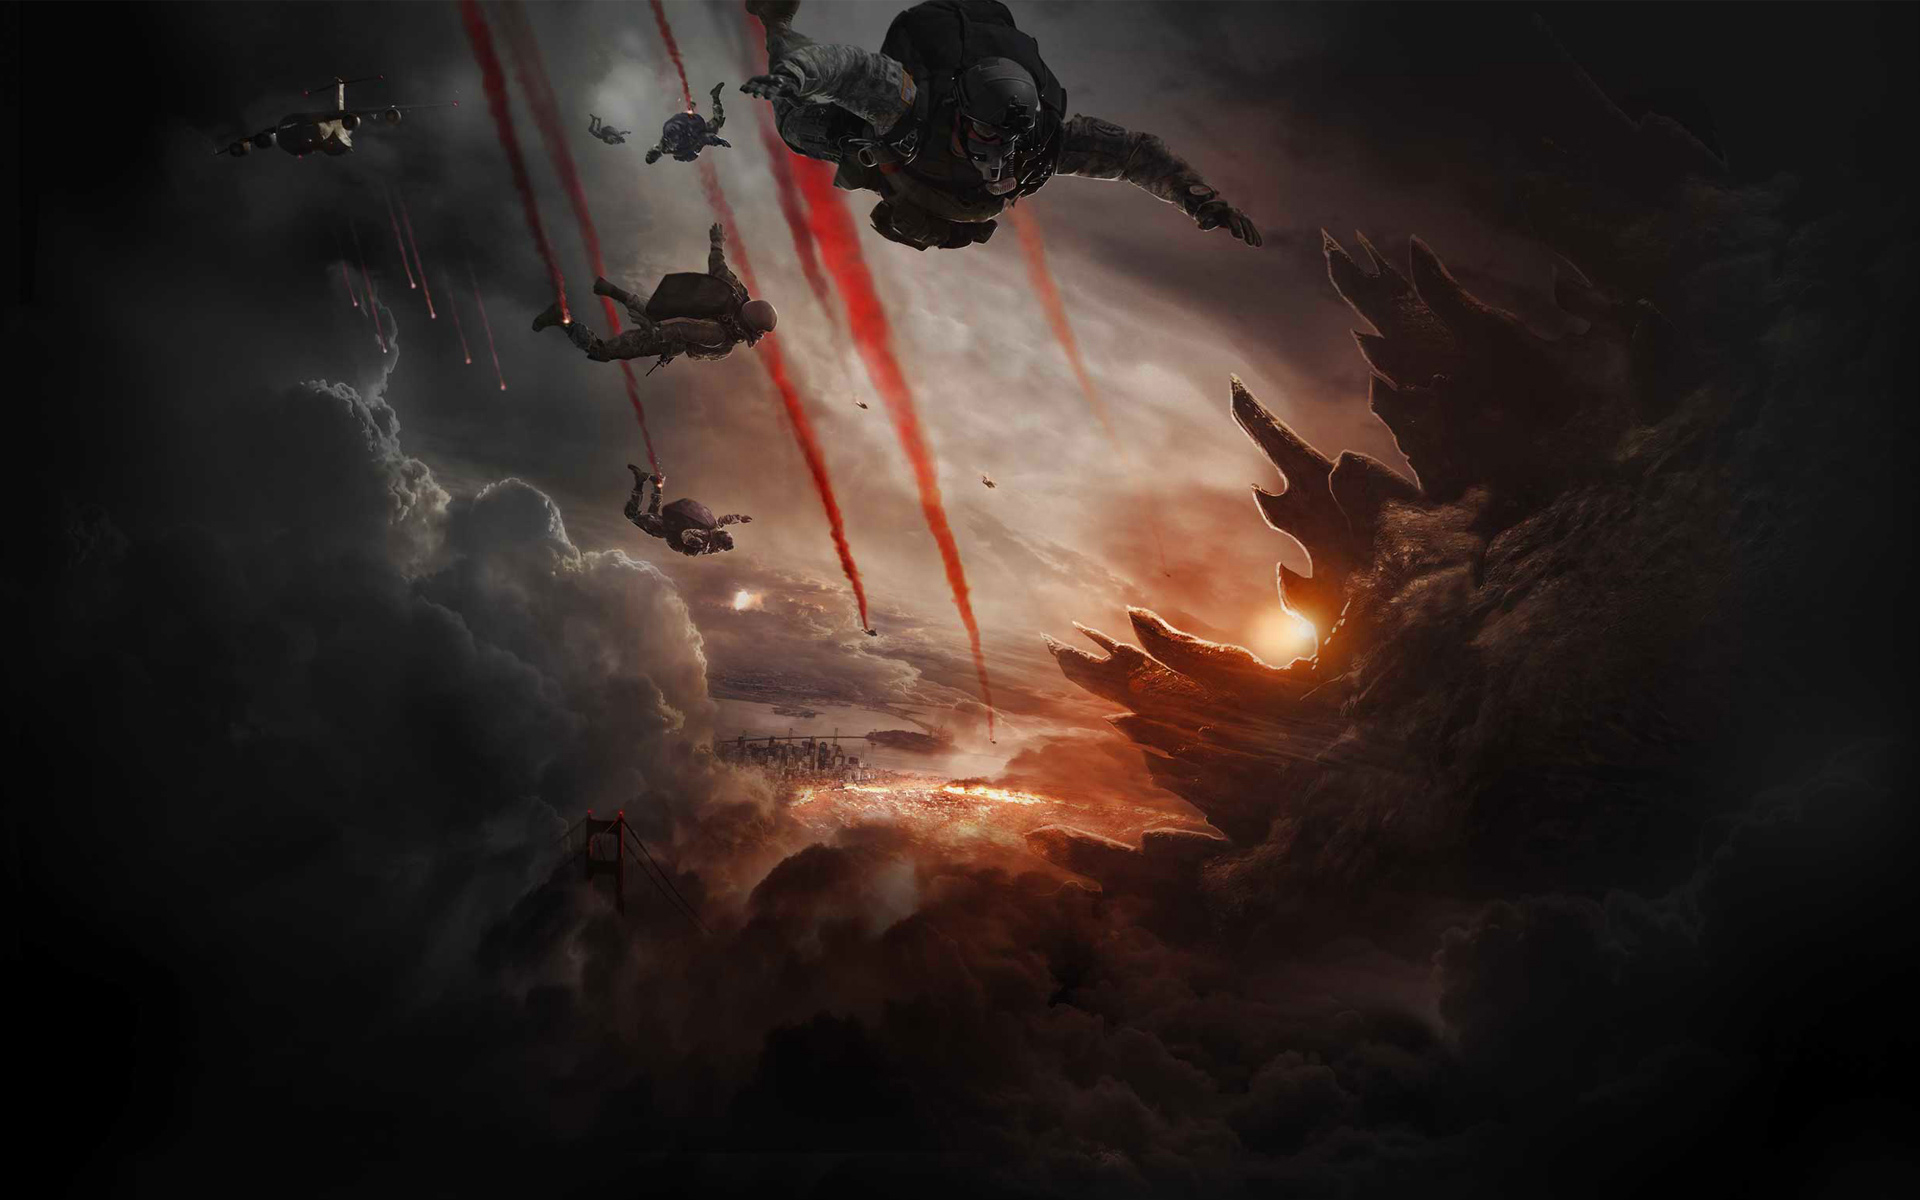 Godzilla Mobile Game Early Release in 2014